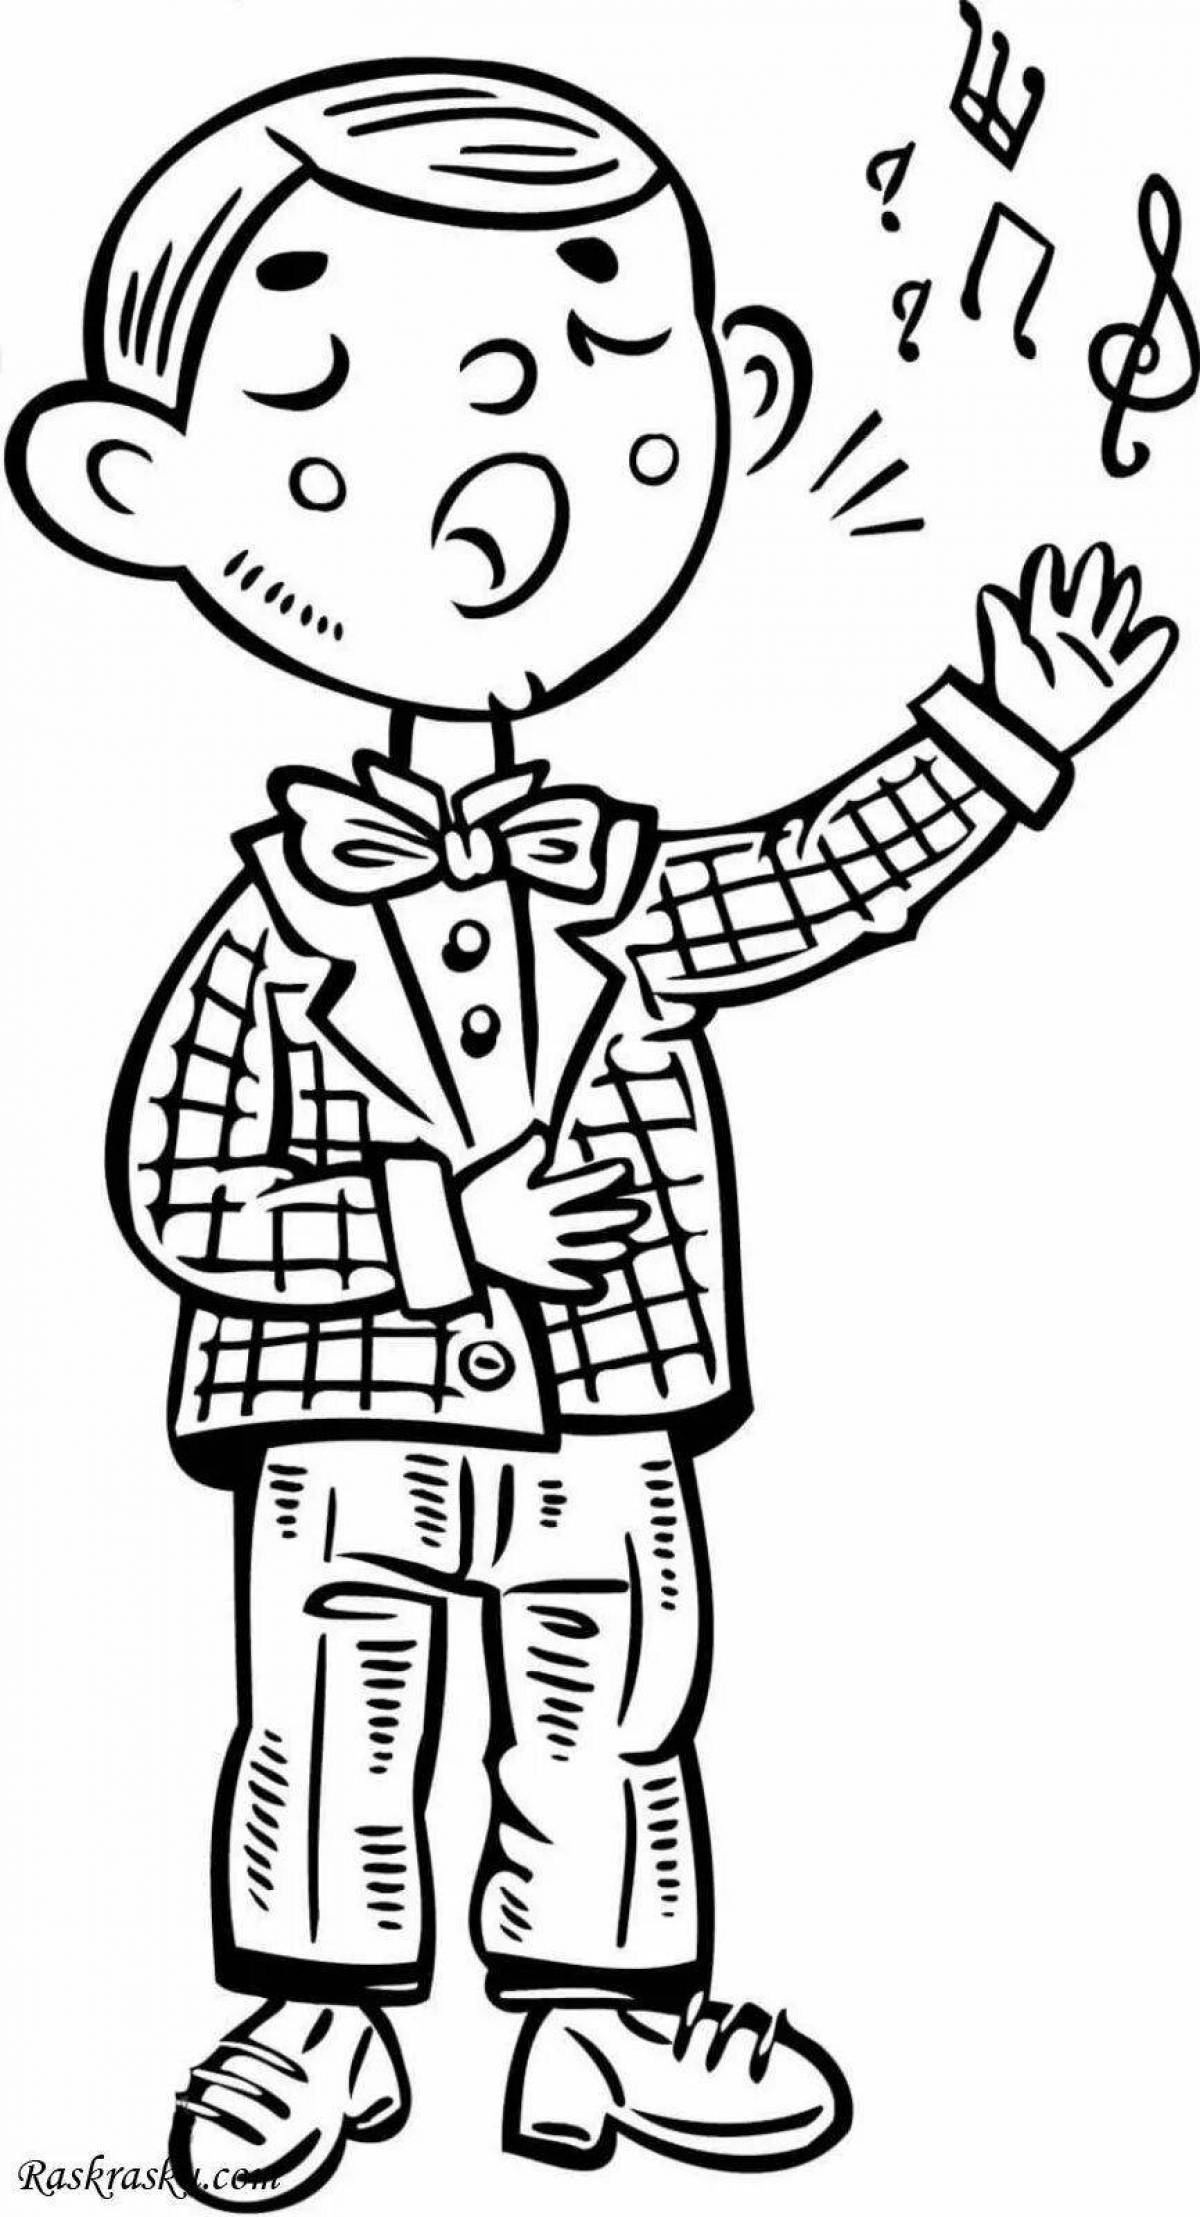 Jolly singer coloring pages for kids